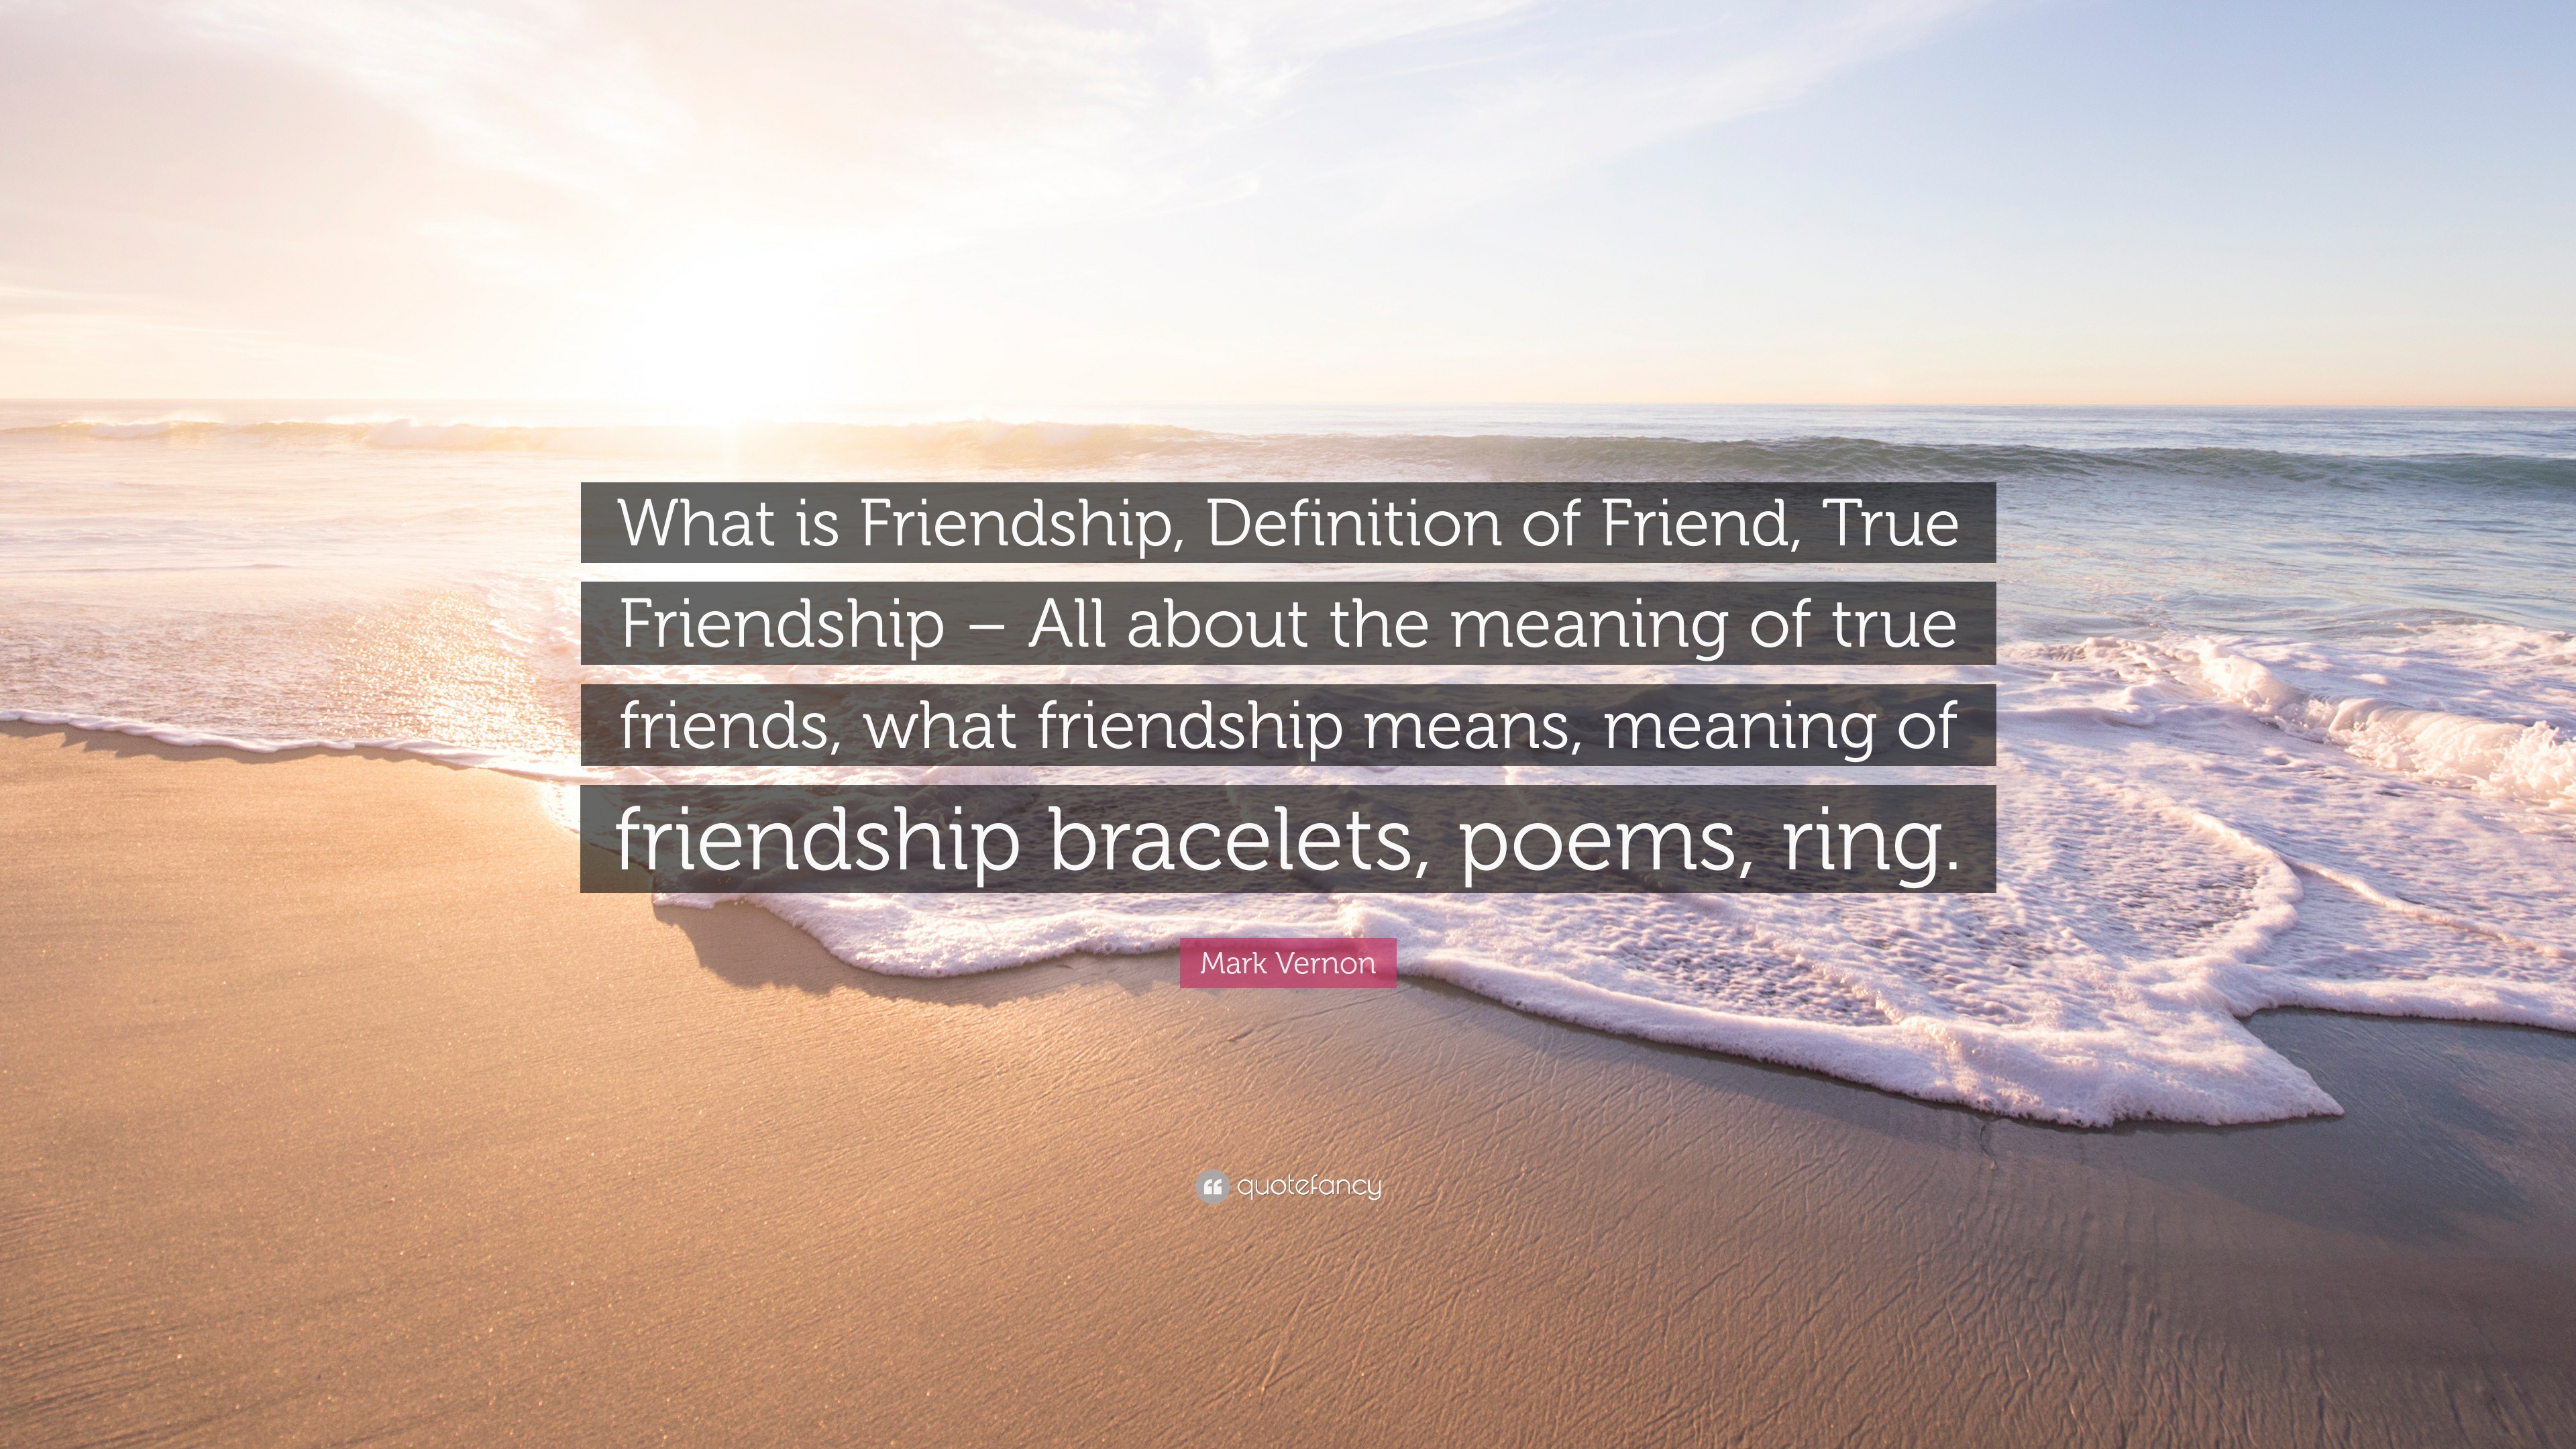 What Is The Real Definition Of A True Friend?